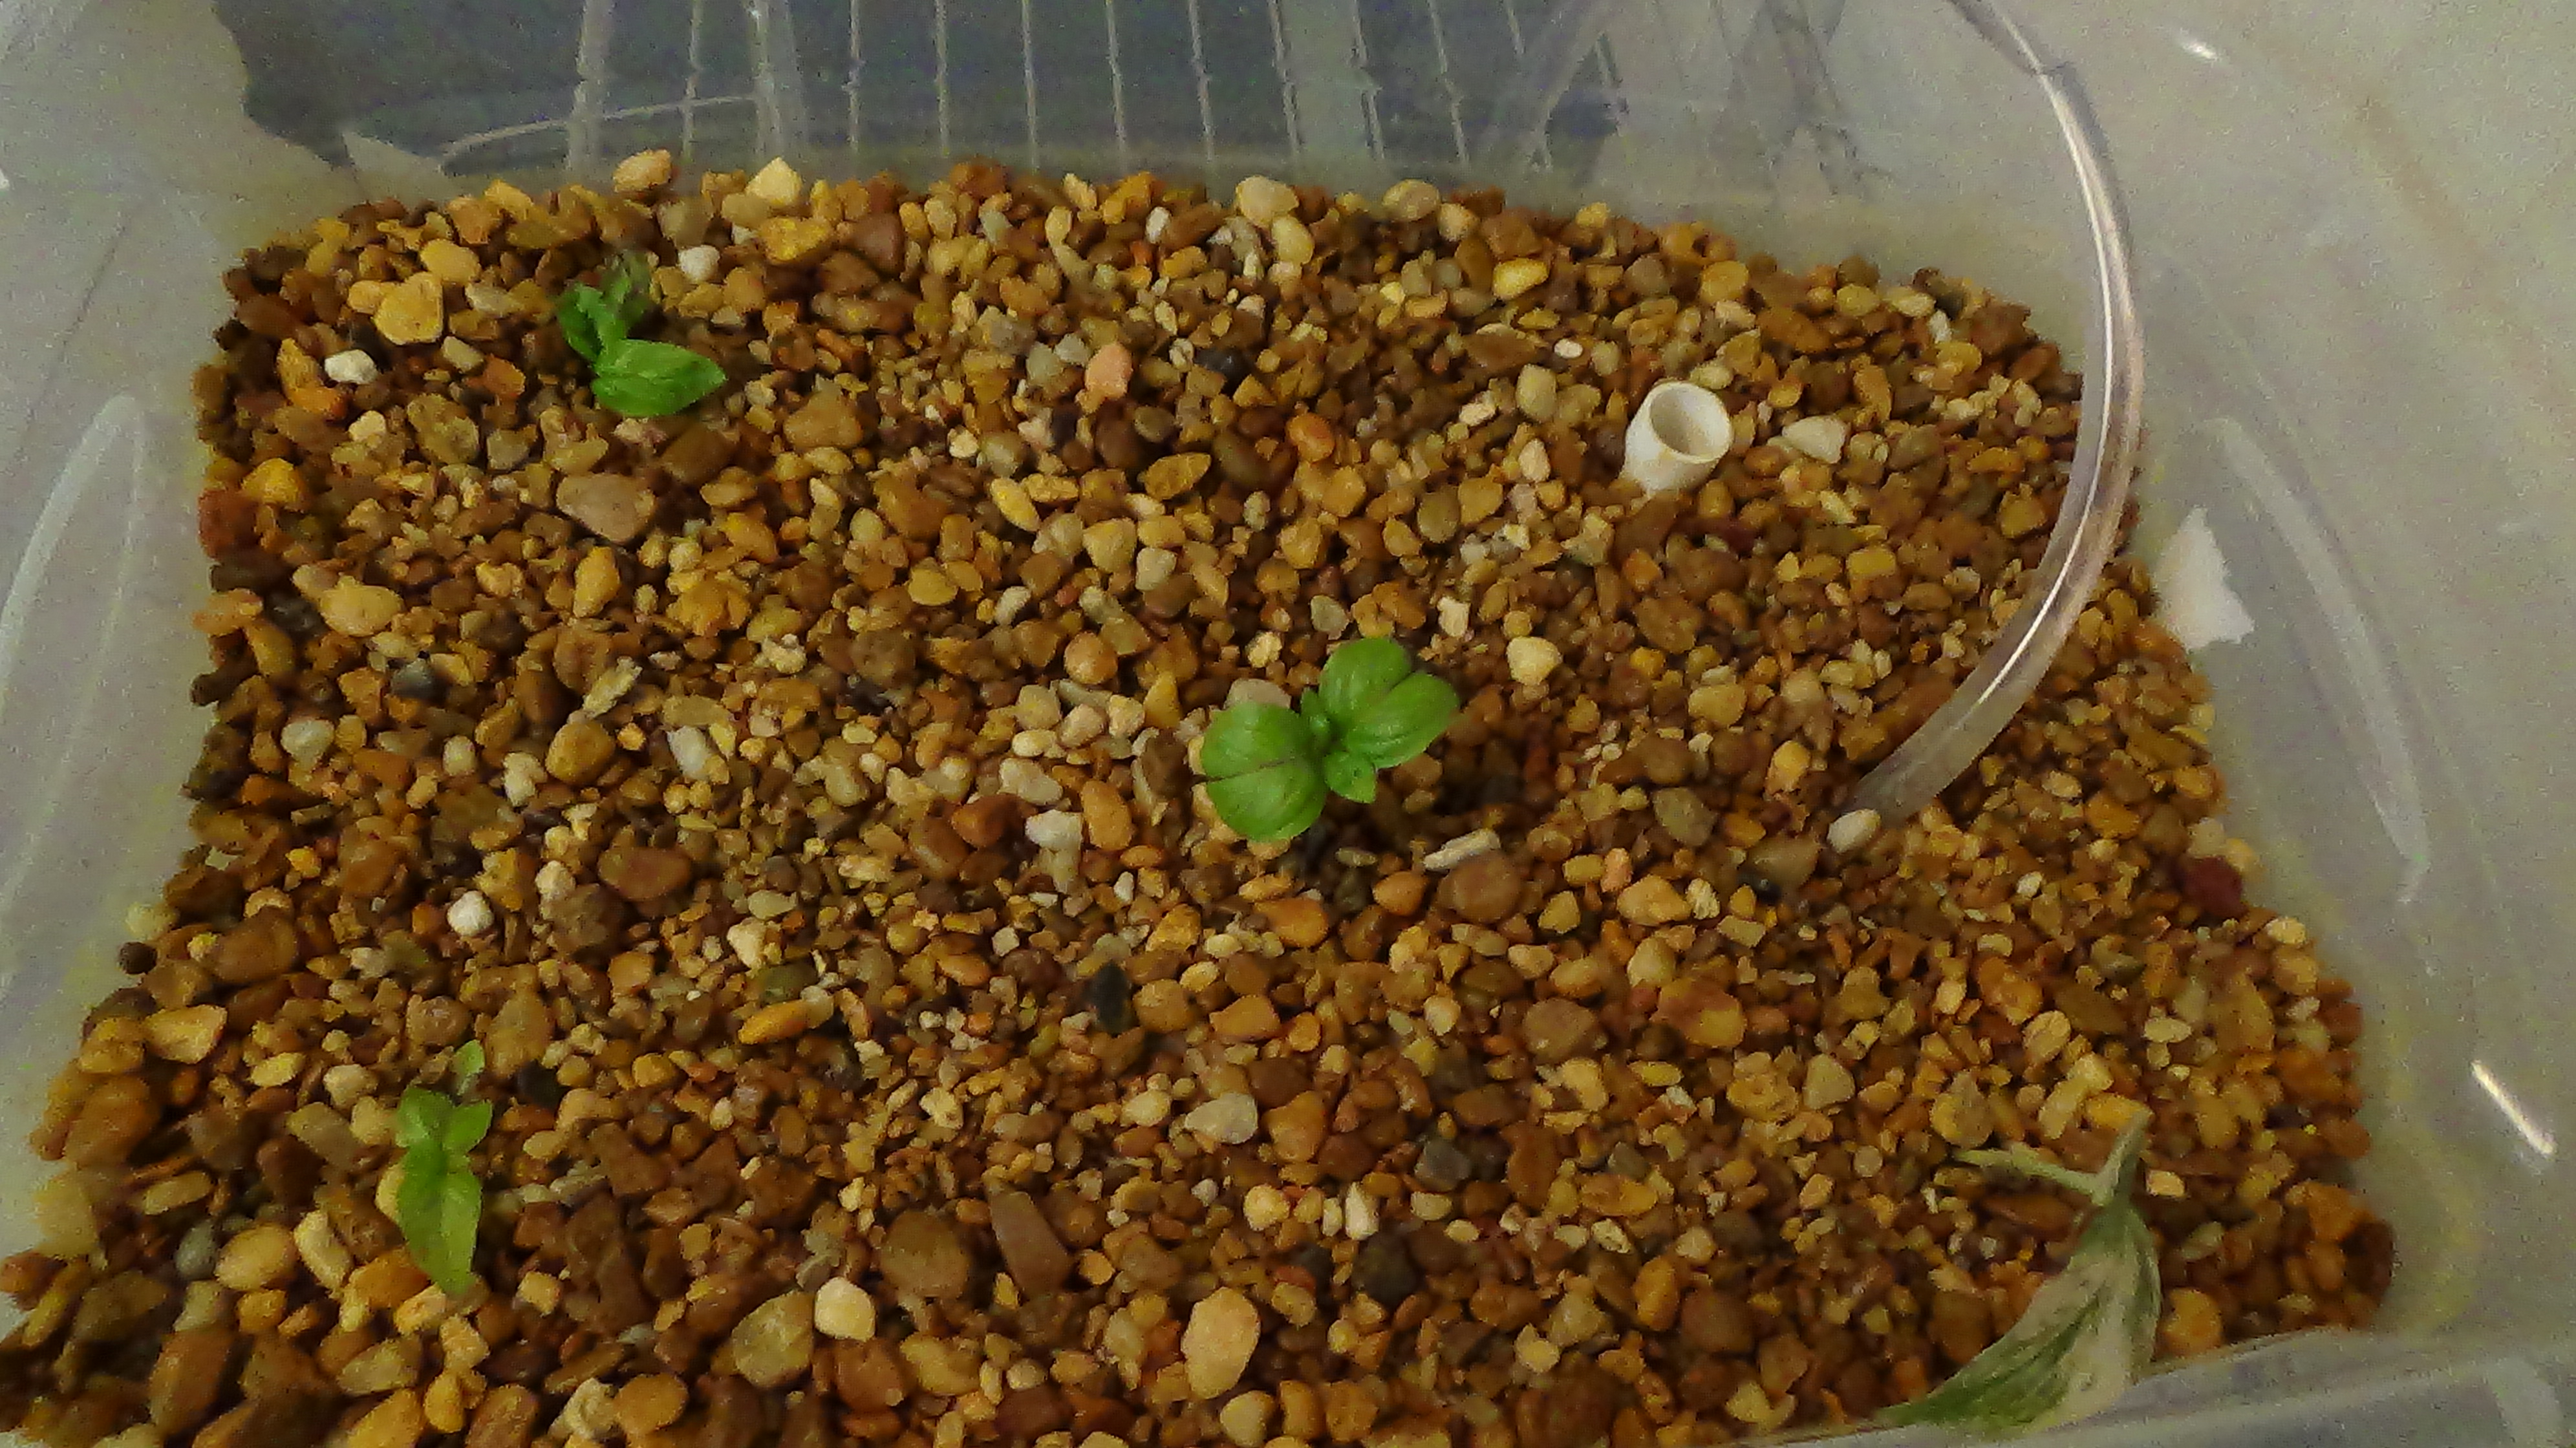 Aquaponics In Your Classroom  Simple systems with great learning 